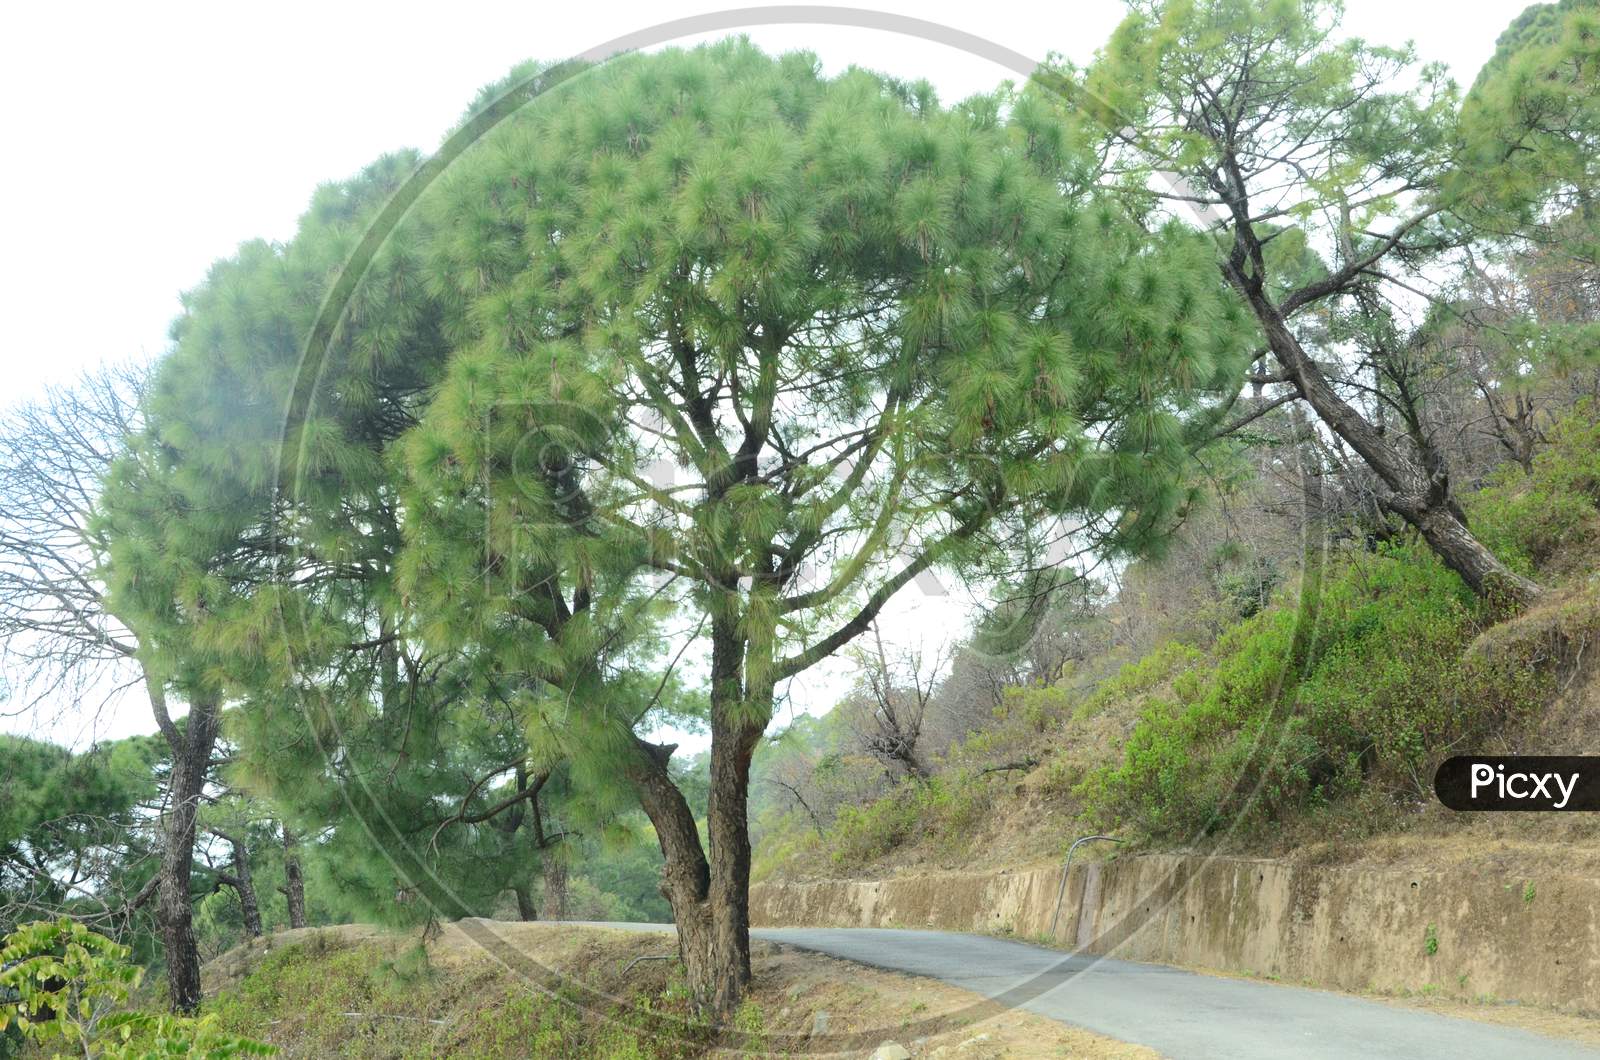 Tree in the road side view of Himachal Pradas,India